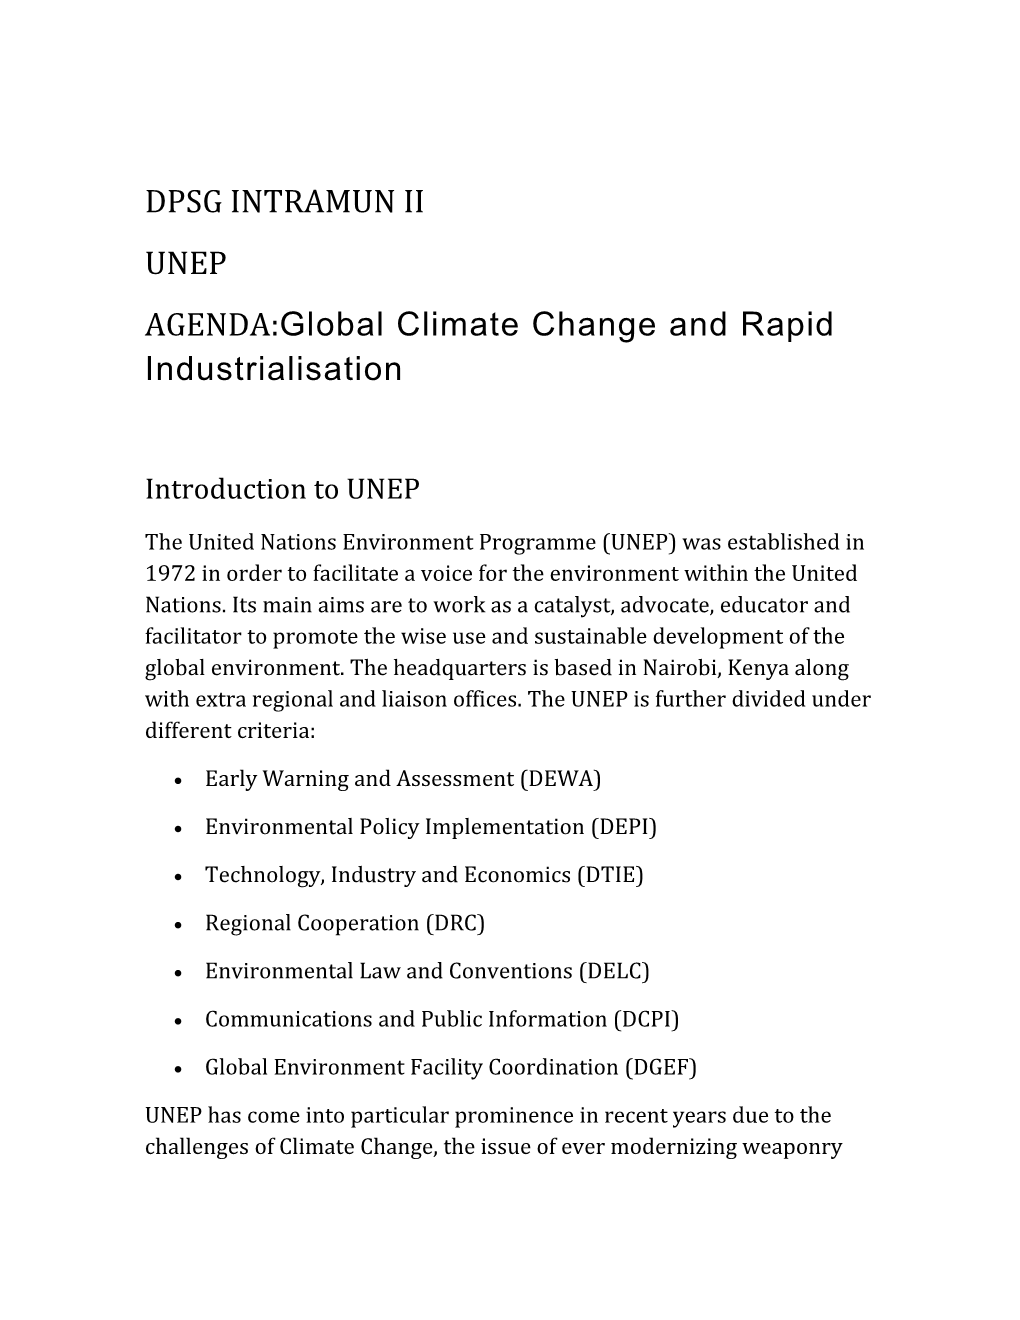 AGENDA:Global Climate Change and Rapid Industrialisation